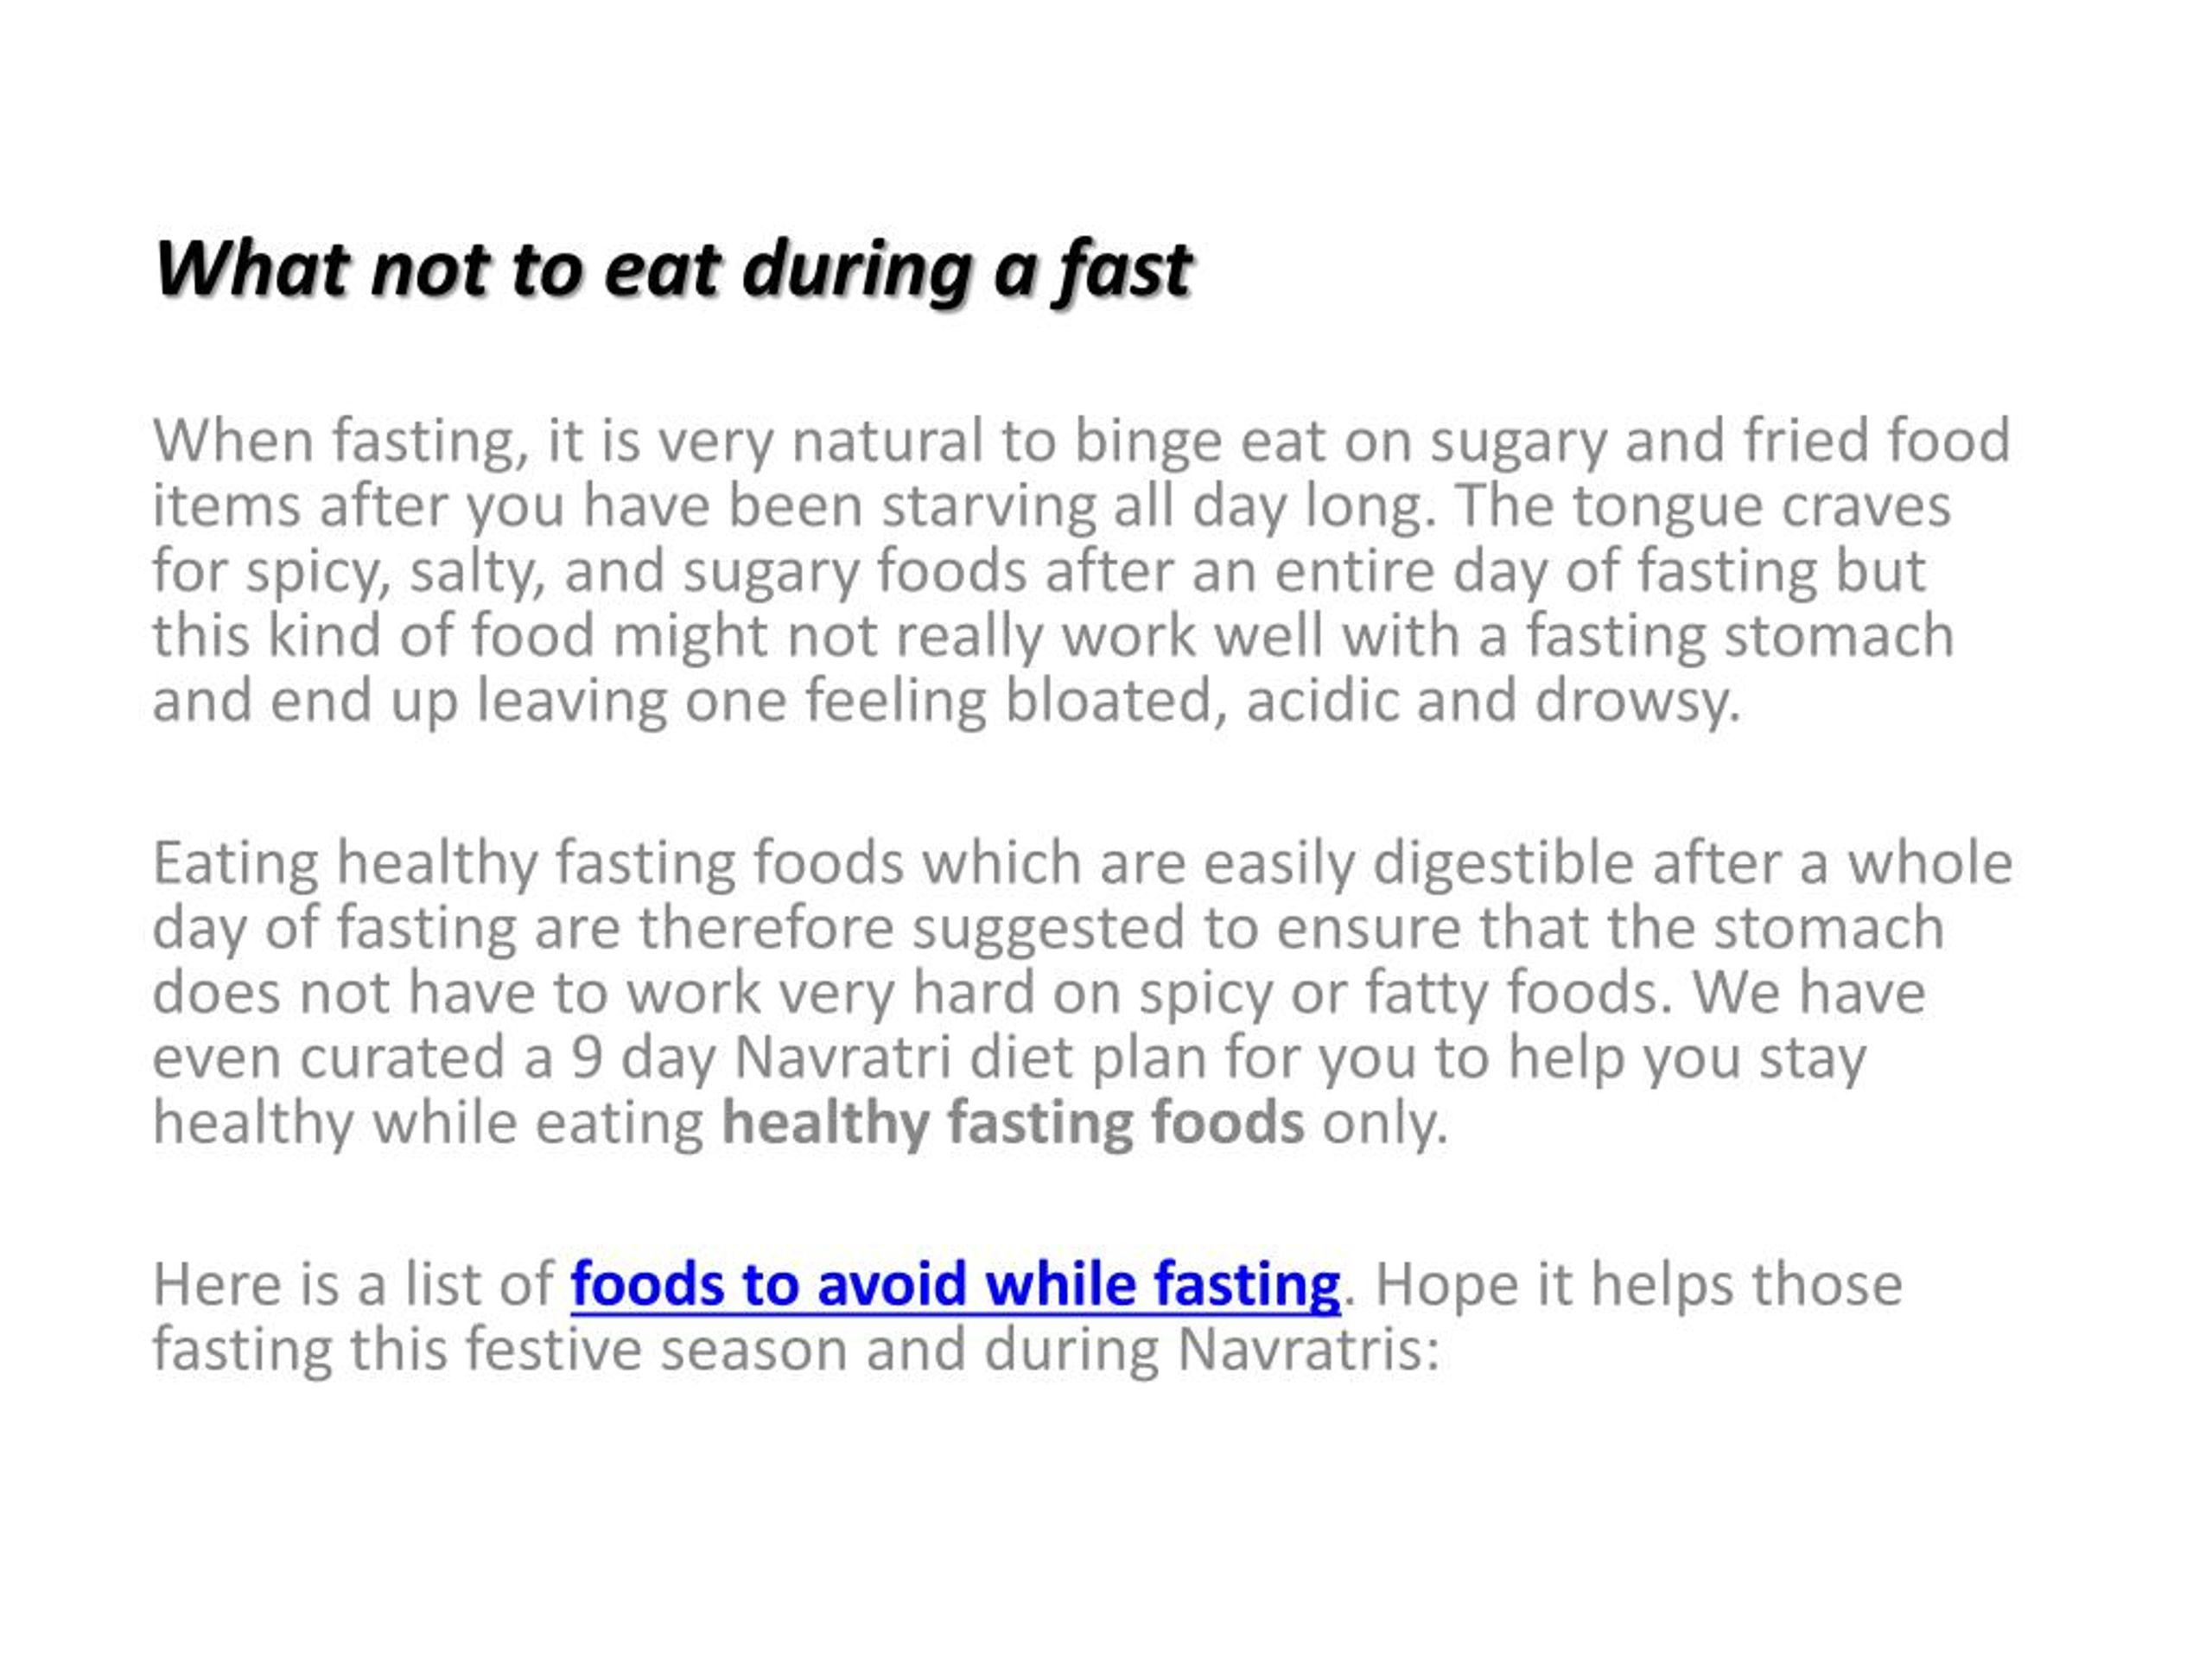 PPT - 9 Foods to Avoid While Fasting | 98Fit PowerPoint Presentation ...